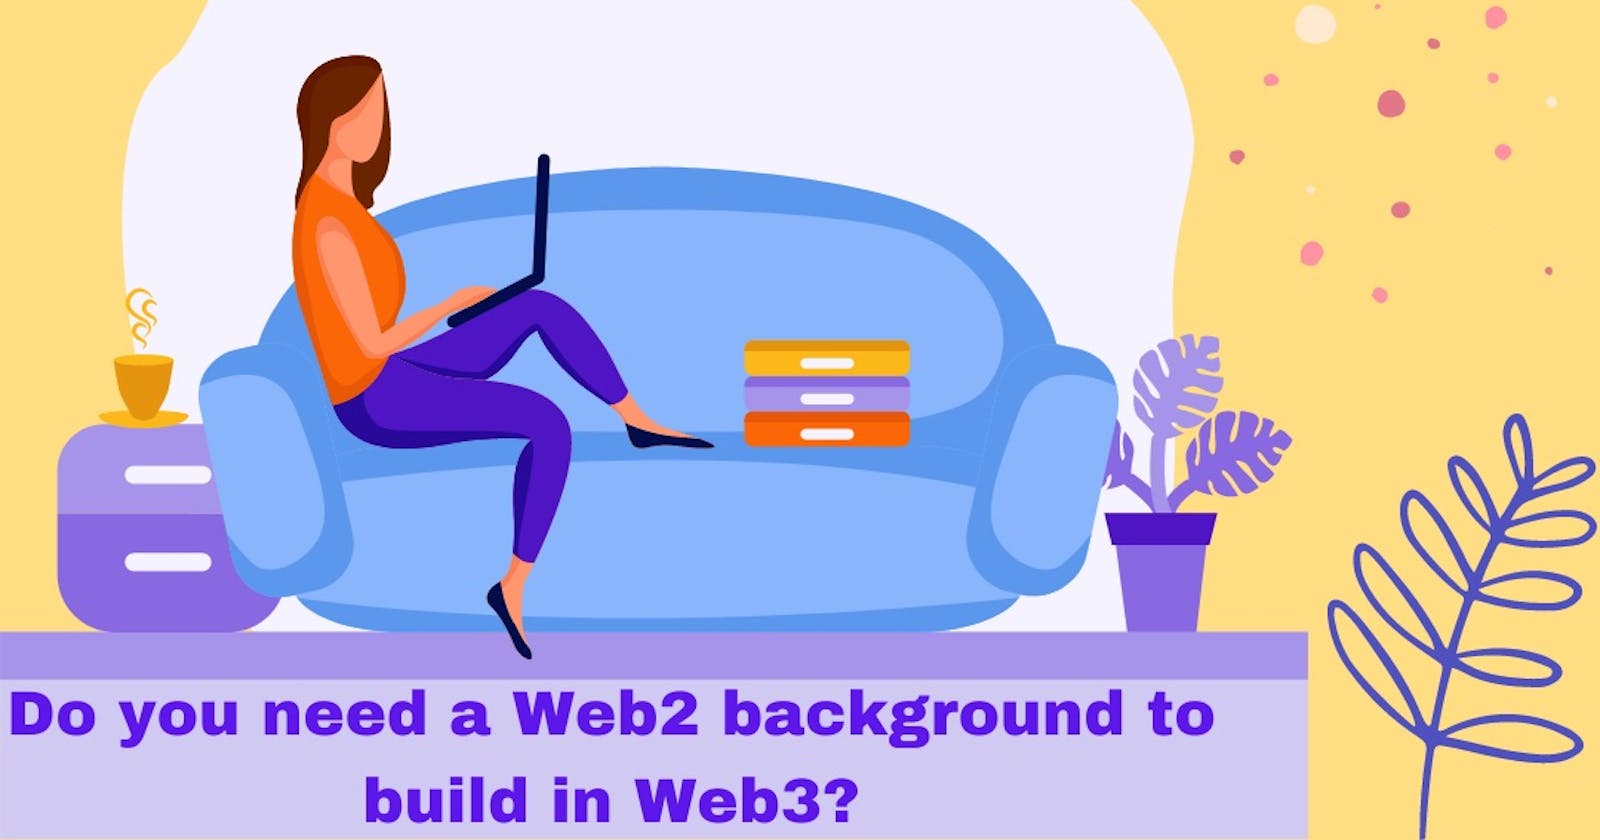 Do you need a Web2 background to build in Web3?